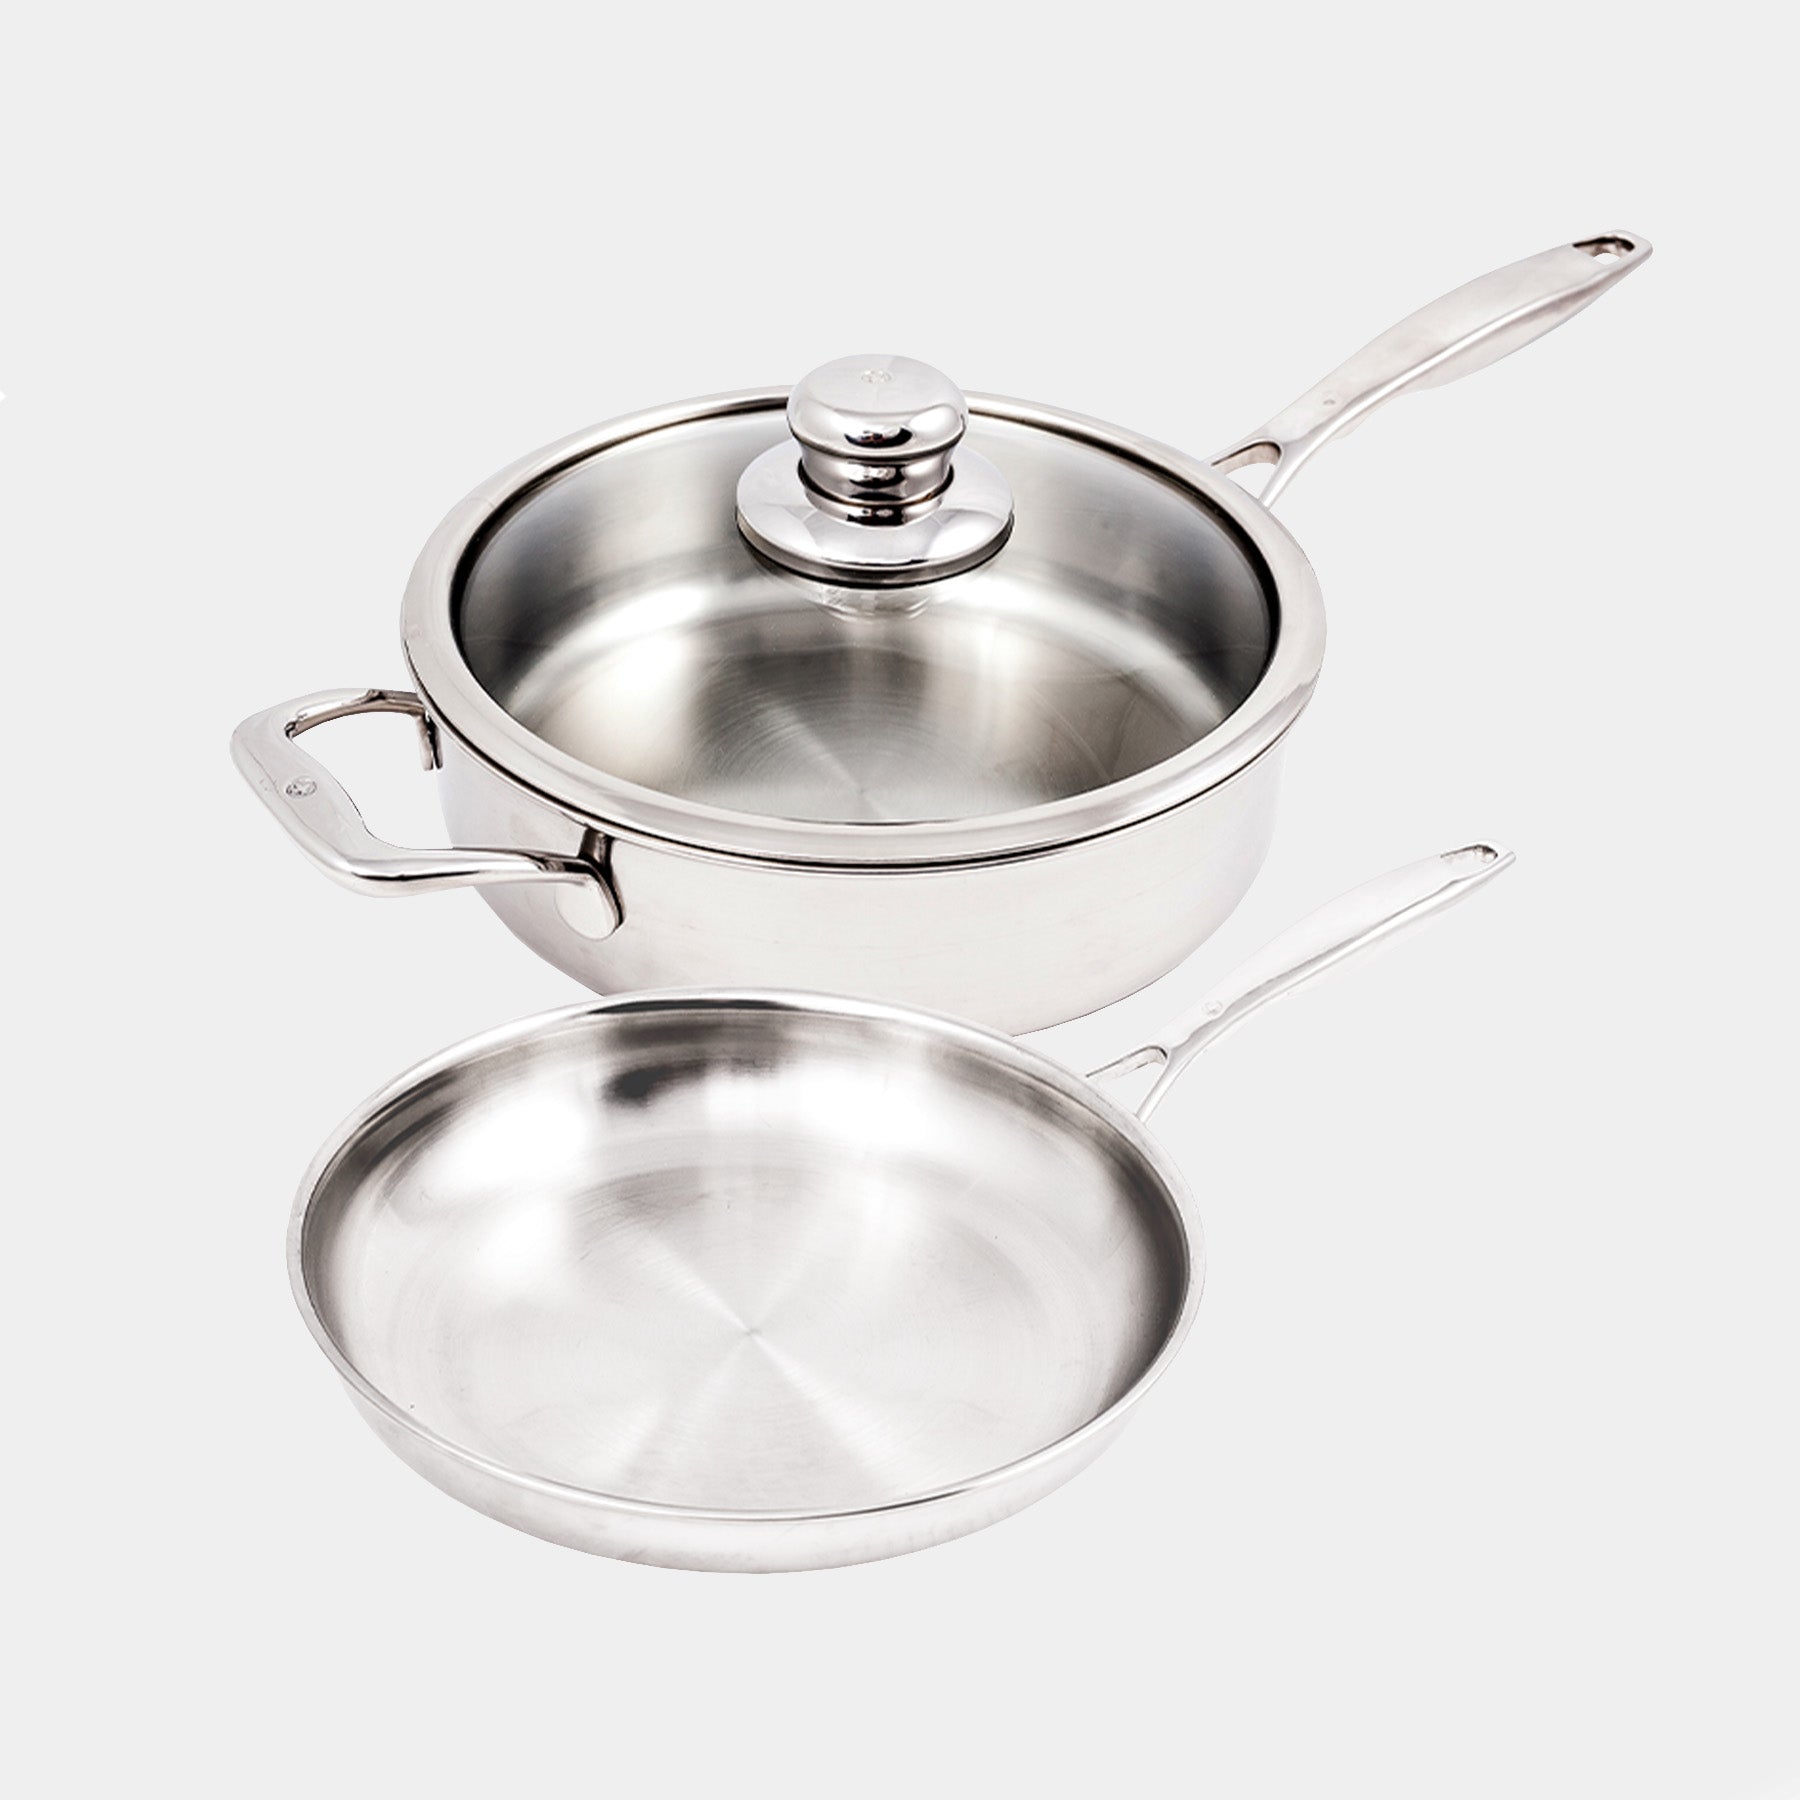 Premium Clad 3-Piece Stainless Steel Set. Includes: 11" Fry Pan + 11" Saute Pan with Lid.